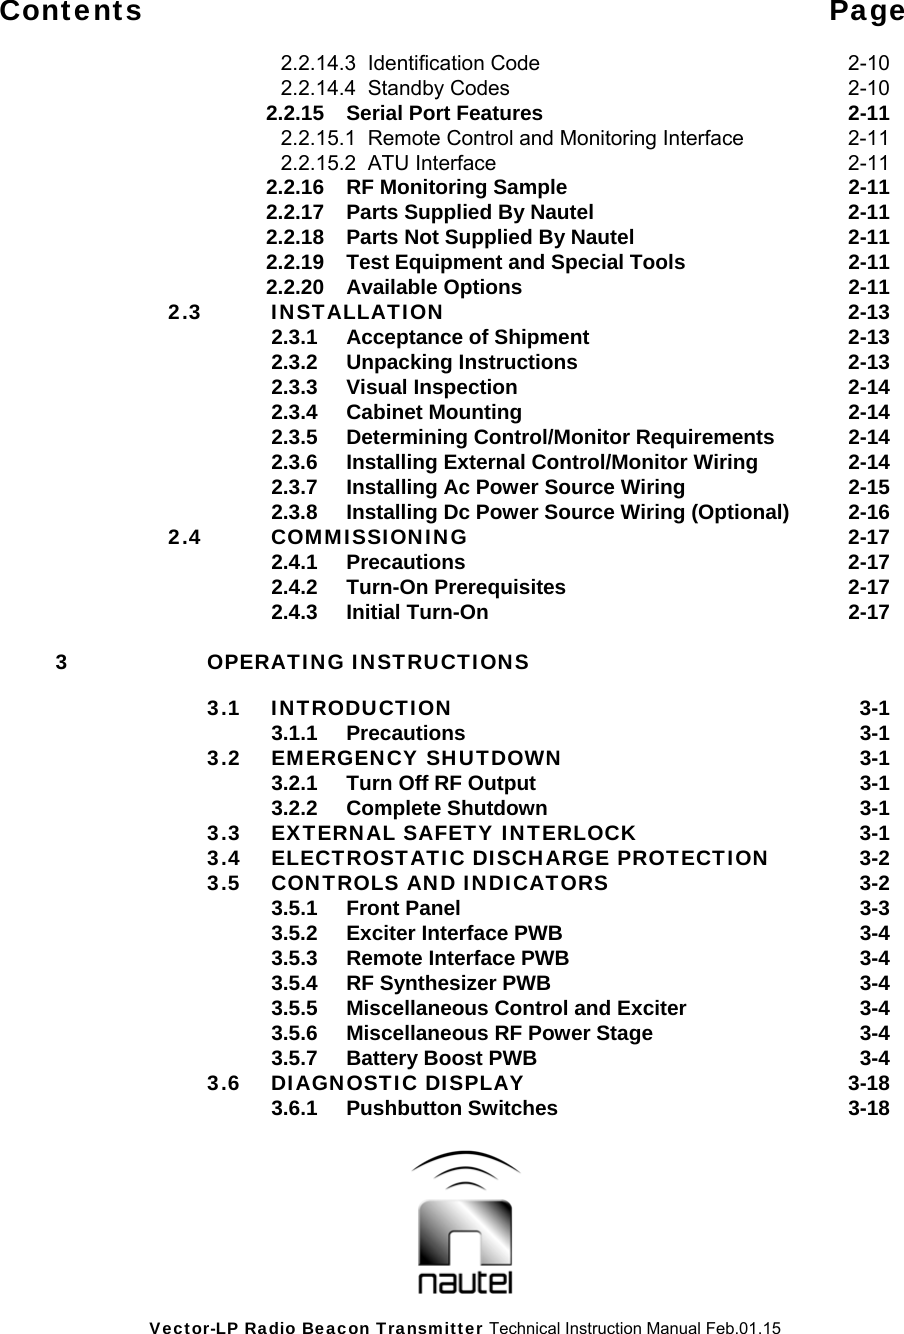 Vector-LP Radio Beacon Transmitter Technical Instruction Manual Feb.01.15 Contents Page    2.2.14.3  Identification Code  2-10   2.2.14.4  Standby Codes  2-10   2.2.15  Serial Port Features  2-11   2.2.15.1  Remote Control and Monitoring Interface  2-11       2.2.15.2  ATU Interface  2-11   2.2.16  RF Monitoring Sample  2-11     2.2.17  Parts Supplied By Nautel  2-11     2.2.18  Parts Not Supplied By Nautel  2-11     2.2.19  Test Equipment and Special Tools  2-11   2.2.20 Available Options  2-11  2.3 INSTALLATION 2-13   2.3.1 Acceptance of Shipment  2-13   2.3.2 Unpacking Instructions  2-13   2.3.3 Visual Inspection  2-14   2.3.4 Cabinet Mounting  2-14     2.3.5  Determining Control/Monitor Requirements  2-14     2.3.6  Installing External Control/Monitor Wiring  2-14     2.3.7  Installing Ac Power Source Wiring  2-15     2.3.8  Installing Dc Power Source Wiring (Optional)  2-16  2.4 COMMISSIONING 2-17   2.4.1 Precautions  2-17   2.4.2 Turn-On Prerequisites  2-17   2.4.3 Initial Turn-On  2-17  3 OPERATING INSTRUCTIONS   3.1 INTRODUCTION  3-1   3.1.1 Precautions  3-1  3.2 EMERGENCY SHUTDOWN 3-1     3.2.1  Turn Off RF Output  3-1   3.2.2 Complete Shutdown  3-1   3.3  EXTERNAL SAFETY INTERLOCK  3-1   3.4  ELECTROSTATIC DISCHARGE PROTECTION  3-2  3.5 CONTROLS AND INDICATORS  3-2   3.5.1 Front Panel  3-3     3.5.2  Exciter Interface PWB  3-4     3.5.3  Remote Interface PWB  3-4     3.5.4  RF Synthesizer PWB  3-4     3.5.5  Miscellaneous Control and Exciter  3-4     3.5.6  Miscellaneous RF Power Stage  3-4     3.5.7  Battery Boost PWB  3-4  3.6 DIAGNOSTIC DISPLAY  3-18   3.6.1 Pushbutton Switches  3-18 